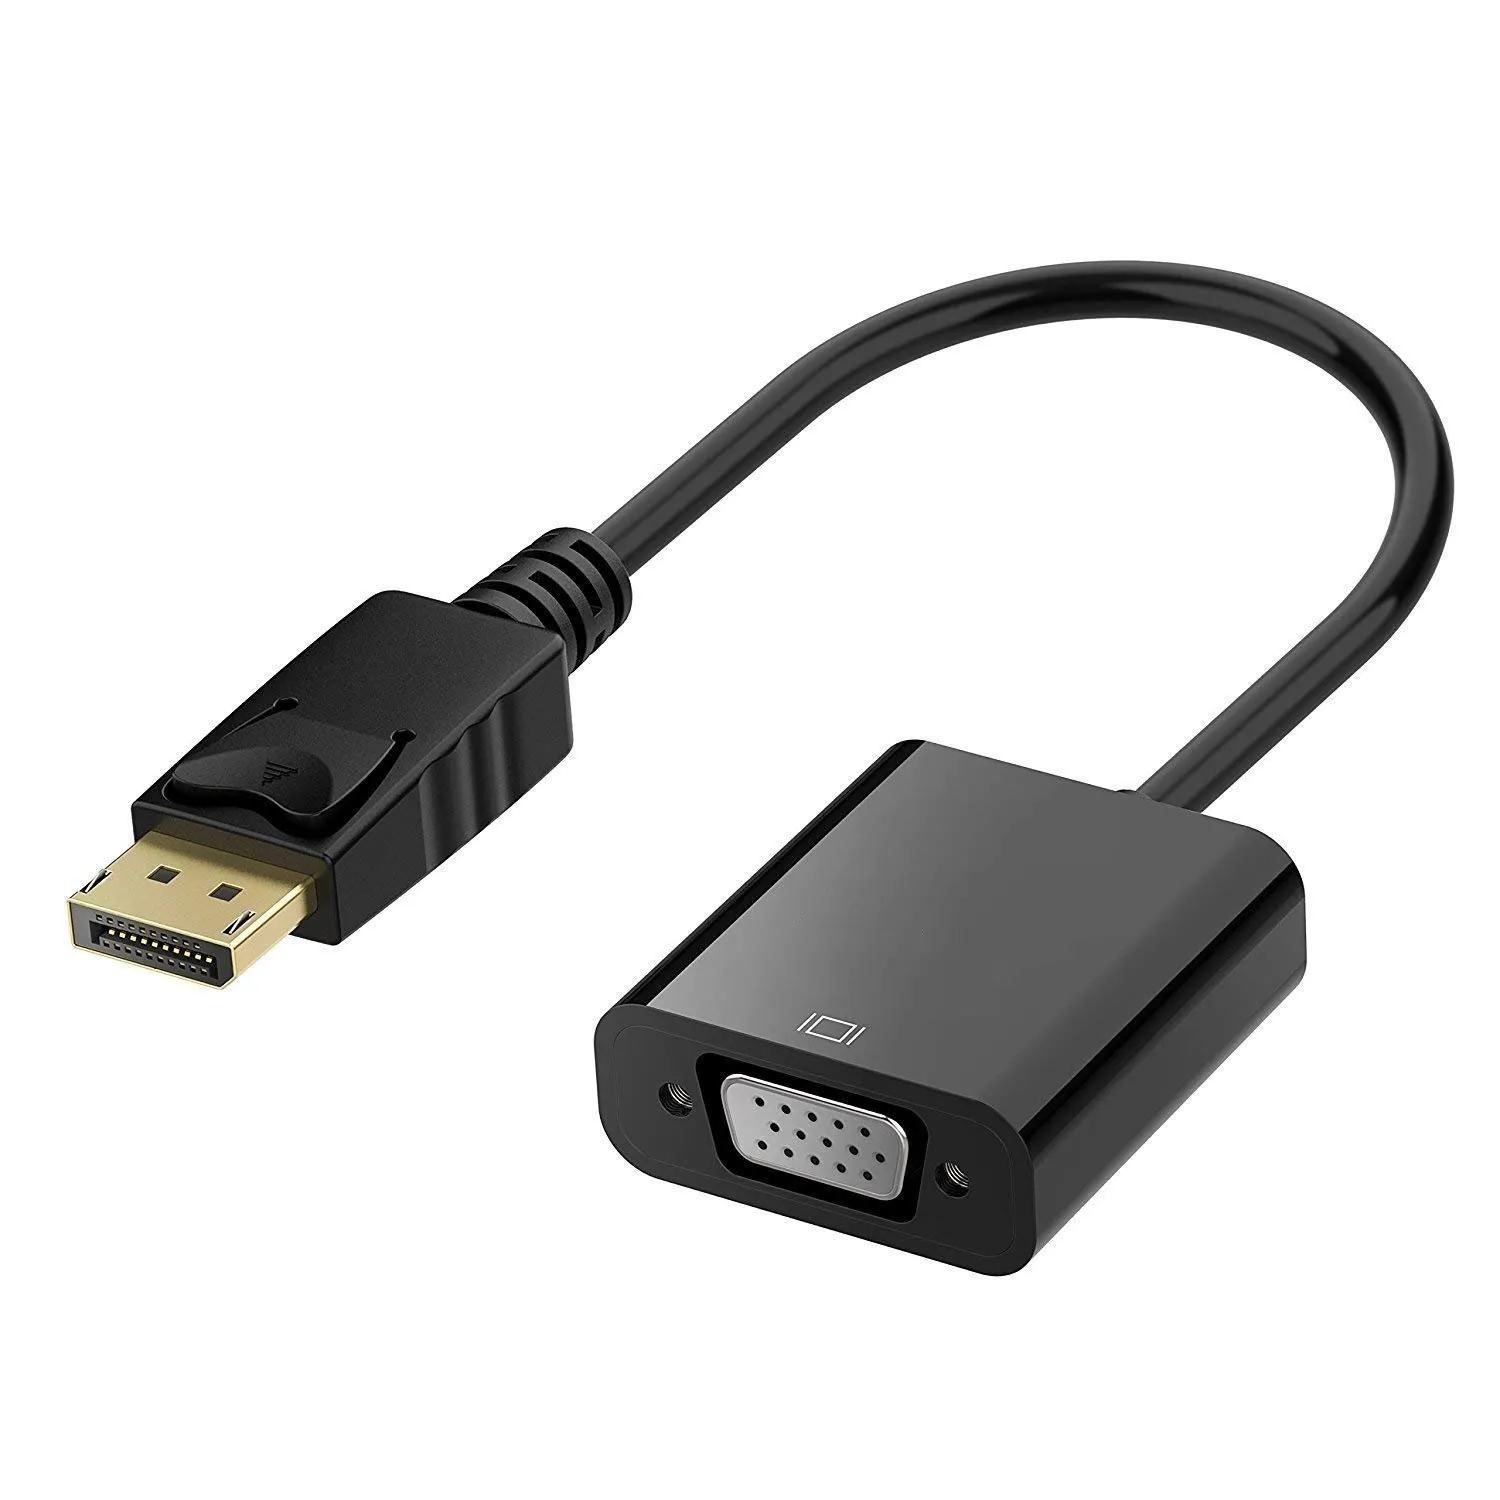 DisplayPort (DP) to VGA Adapter, Gold-Plated Display Port to VGA Adapter (Male to Female) Compatible with Computer, Desktop, Lap